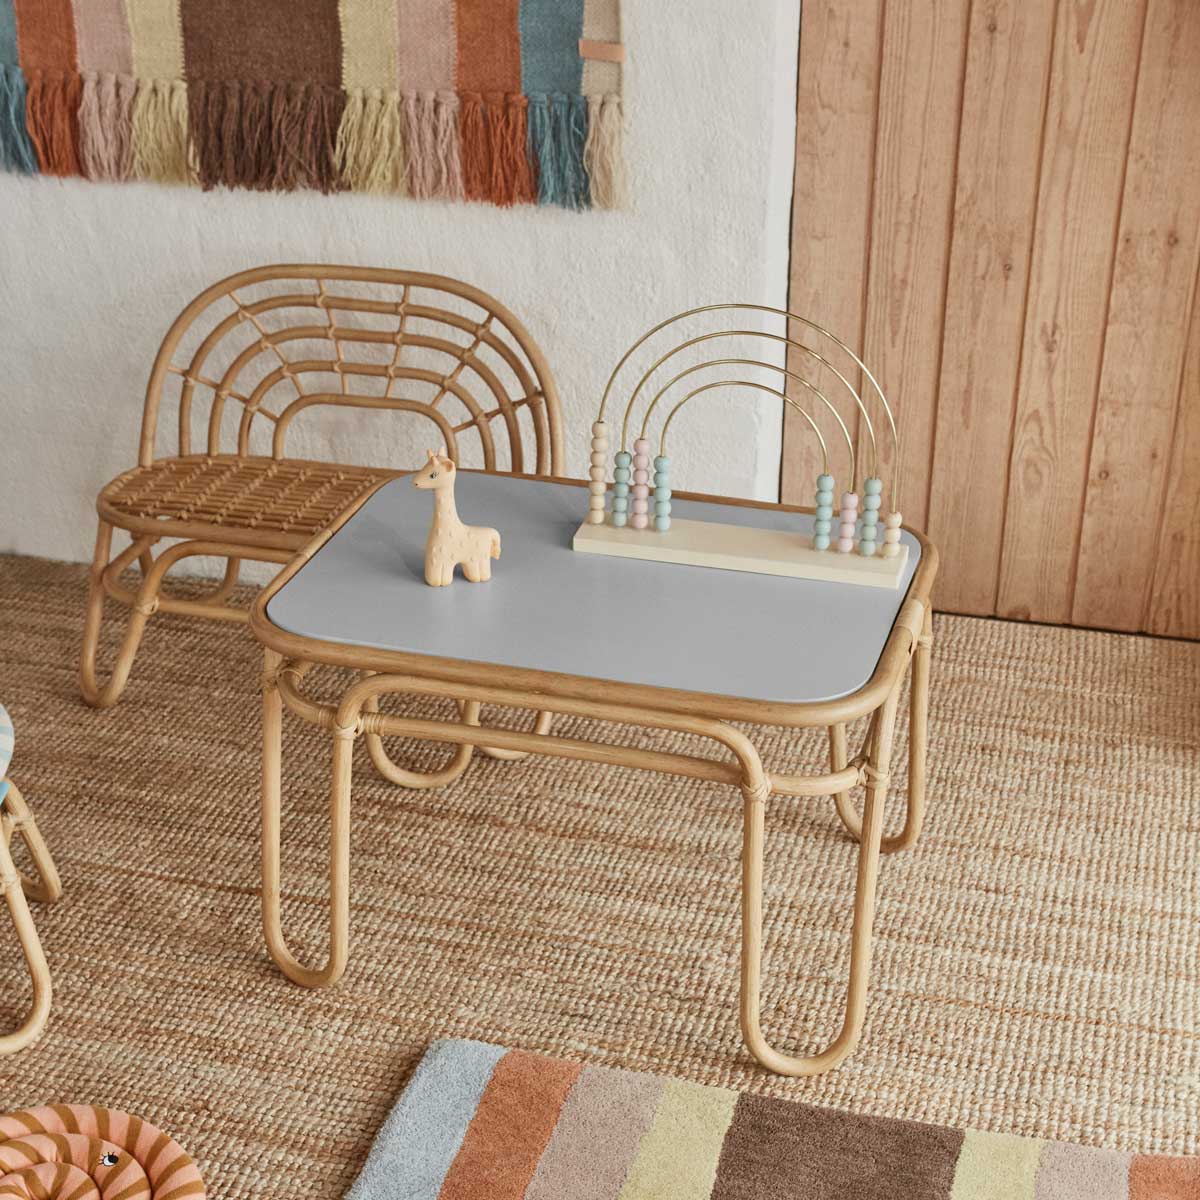 Rainbow Mini Bench from Oyoy living design Childrens rattan bench and table set